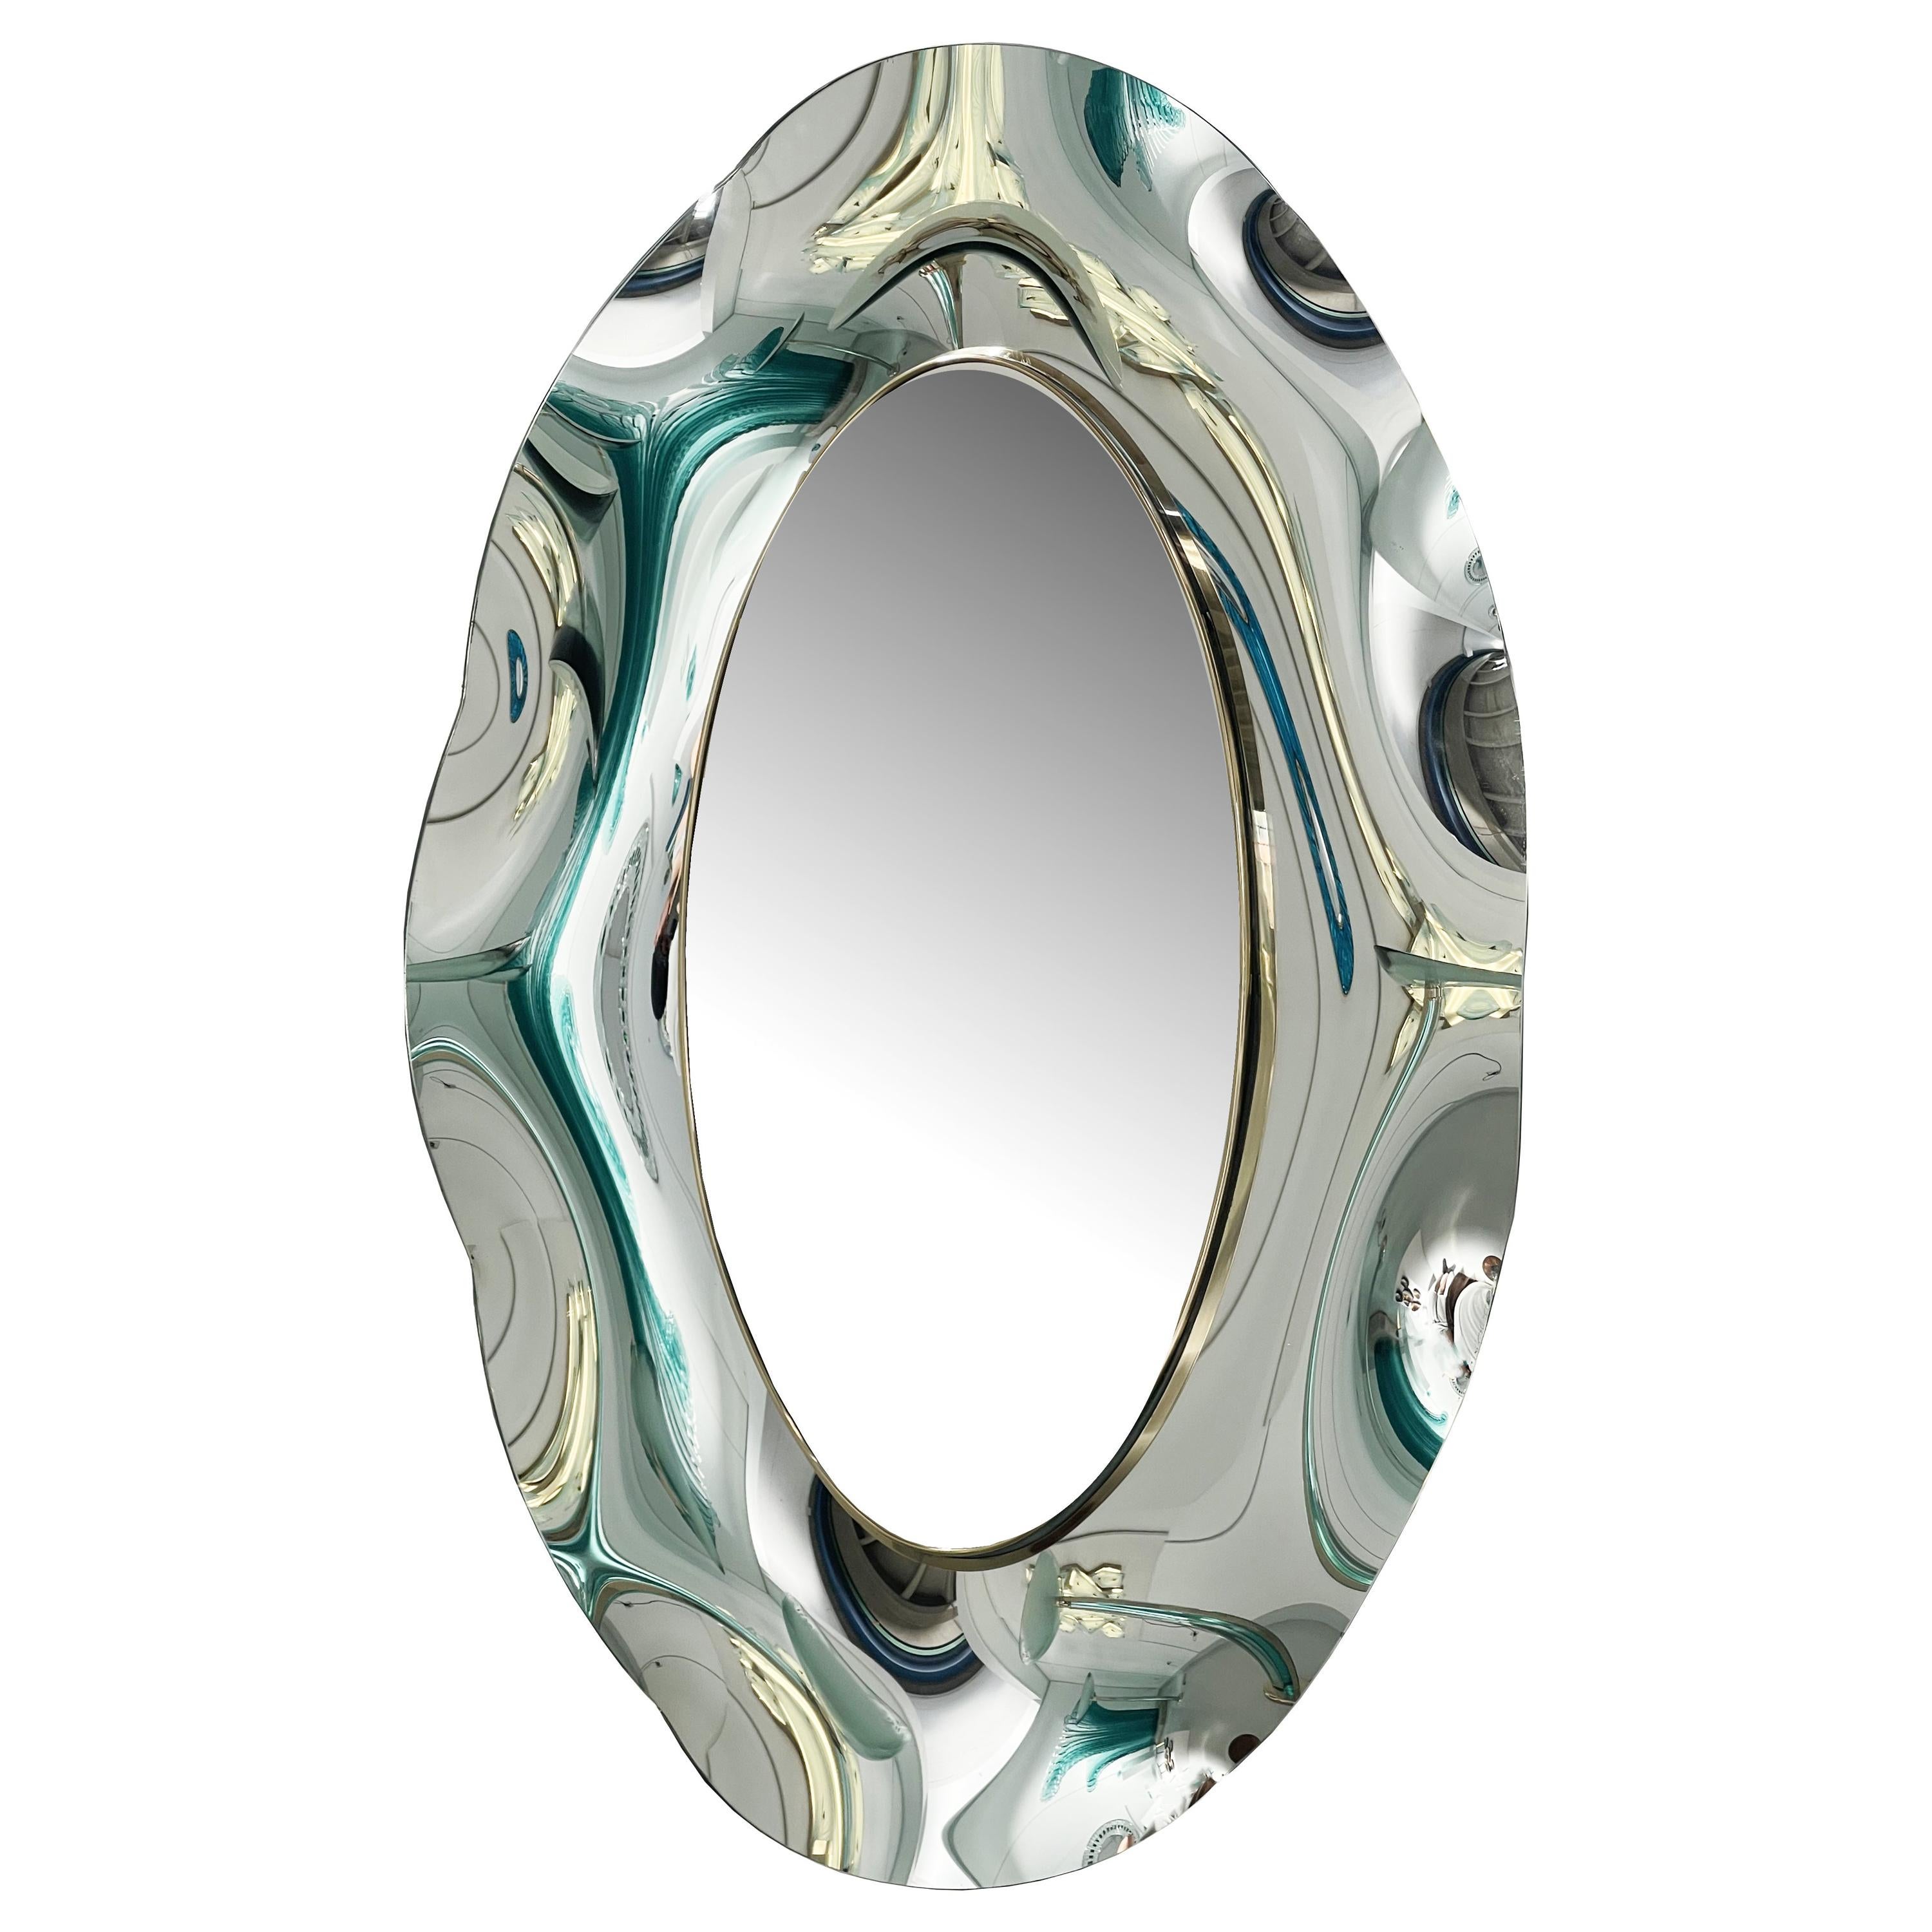 Contemporary 'Undulate' Oval Mirror Silver Crystal and Brass by Ghirò Studio